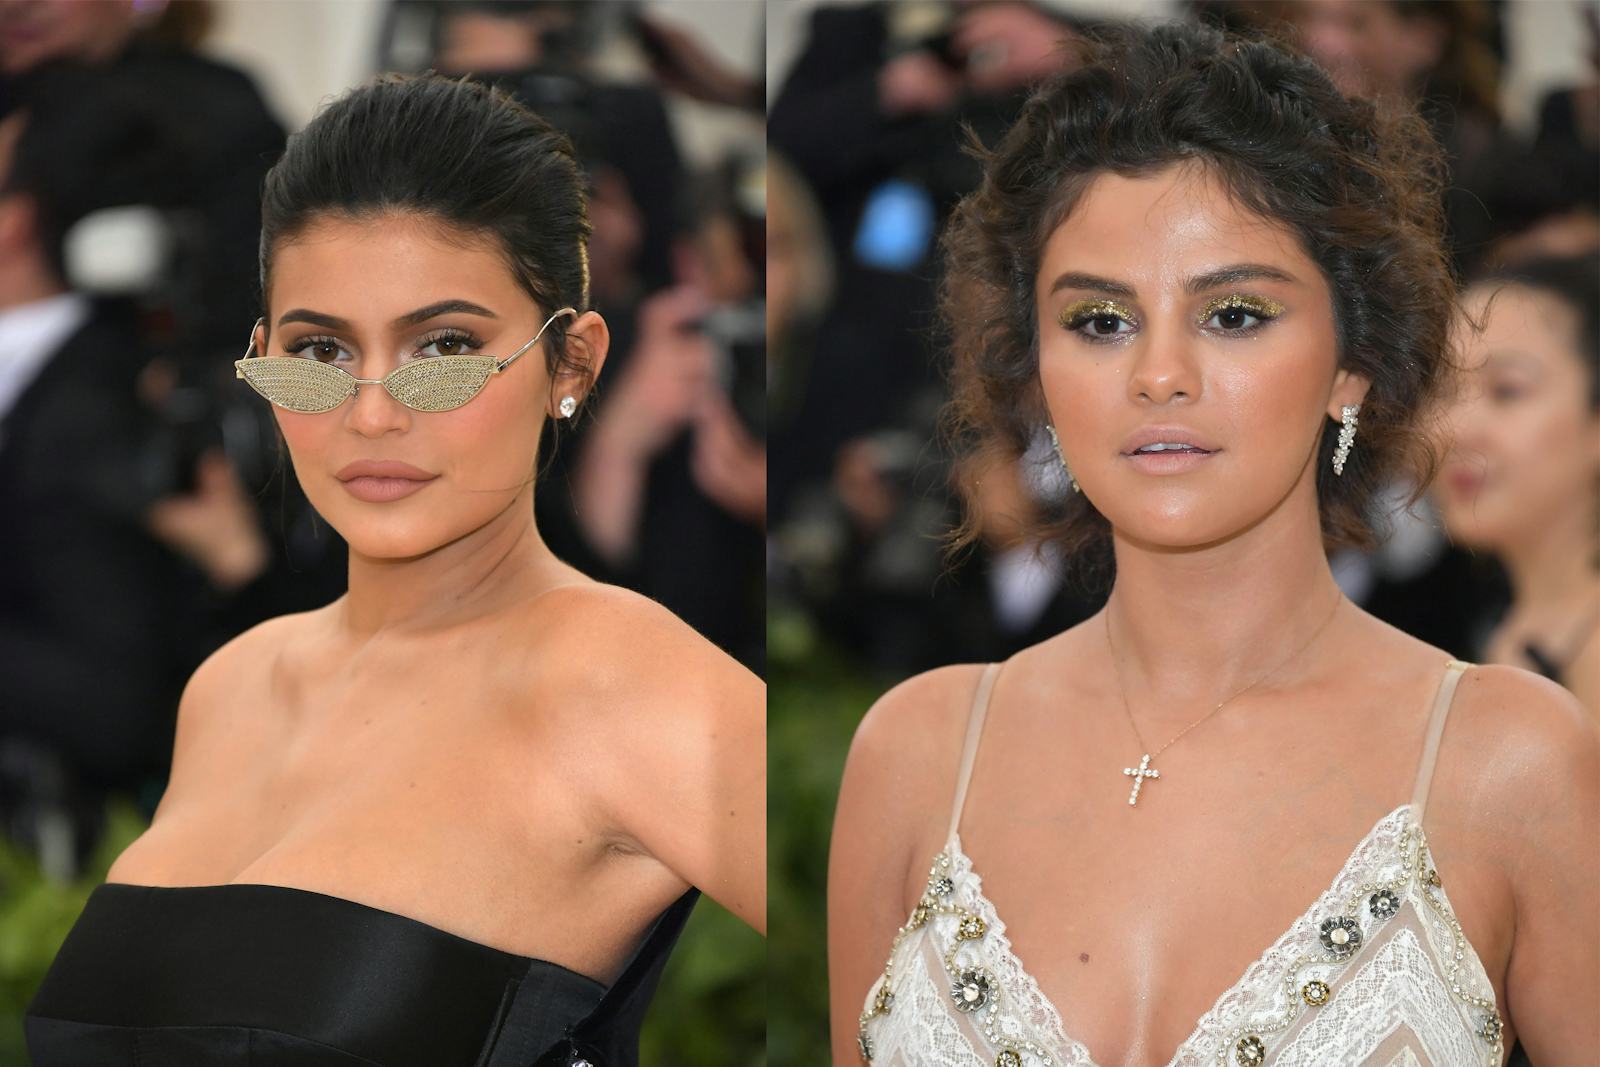 Kylie Jenner And Selena Gomez Reunited At The Met Gala After A Long